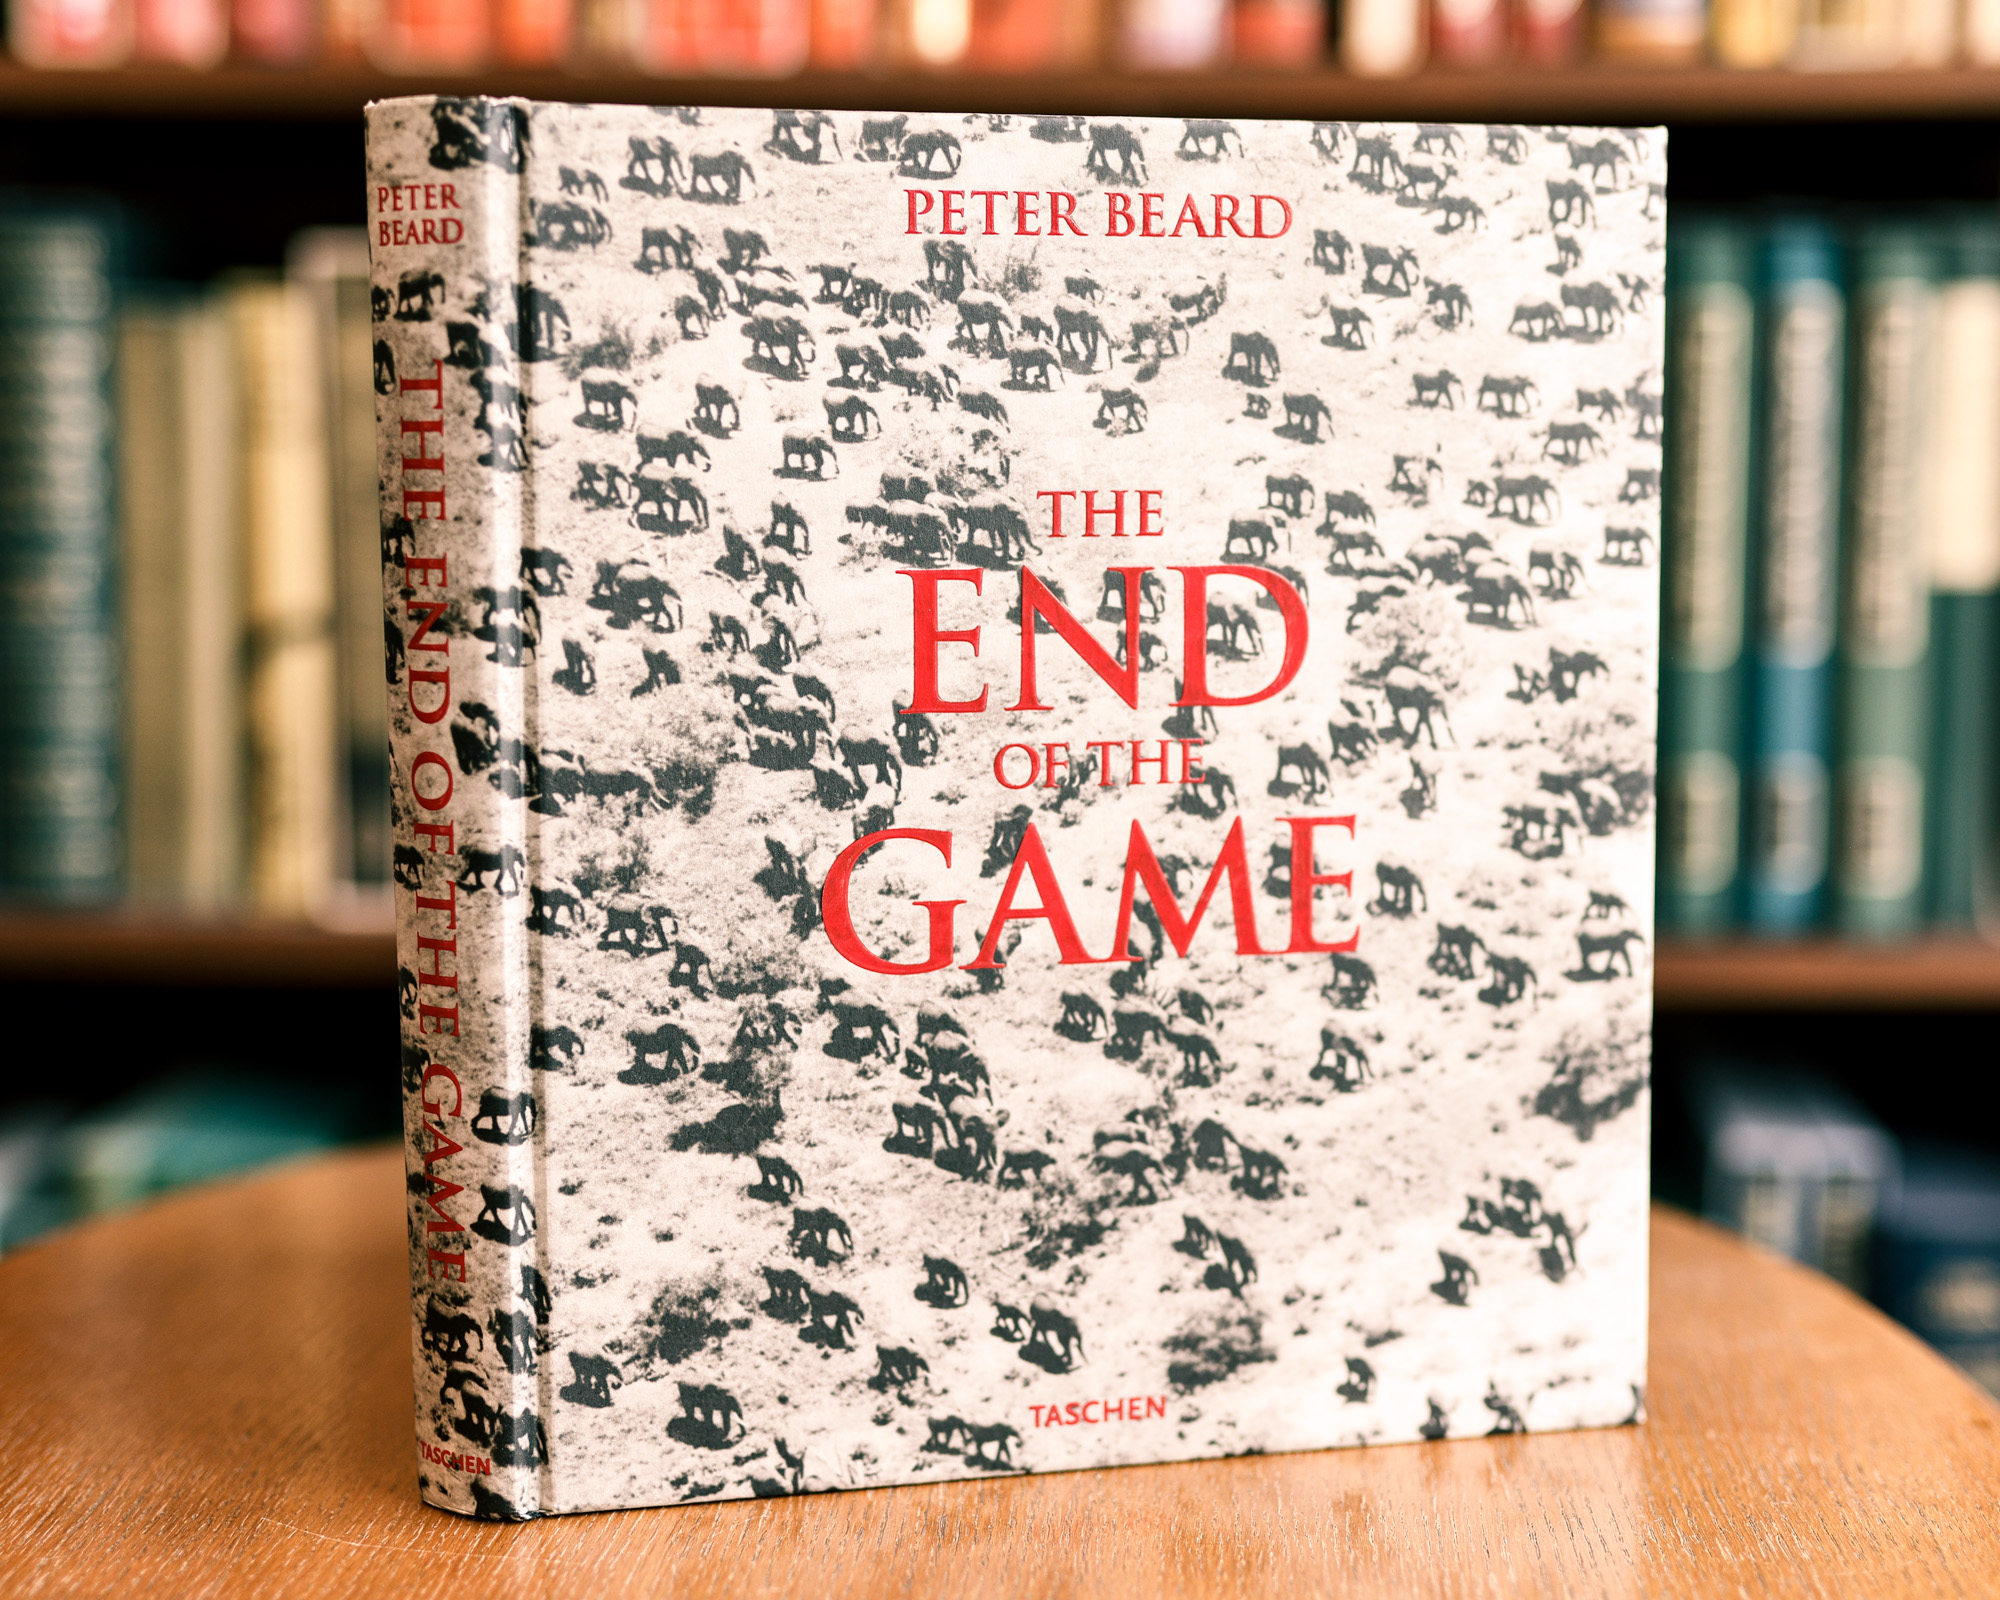 The End of the Game by Peter H. Beard